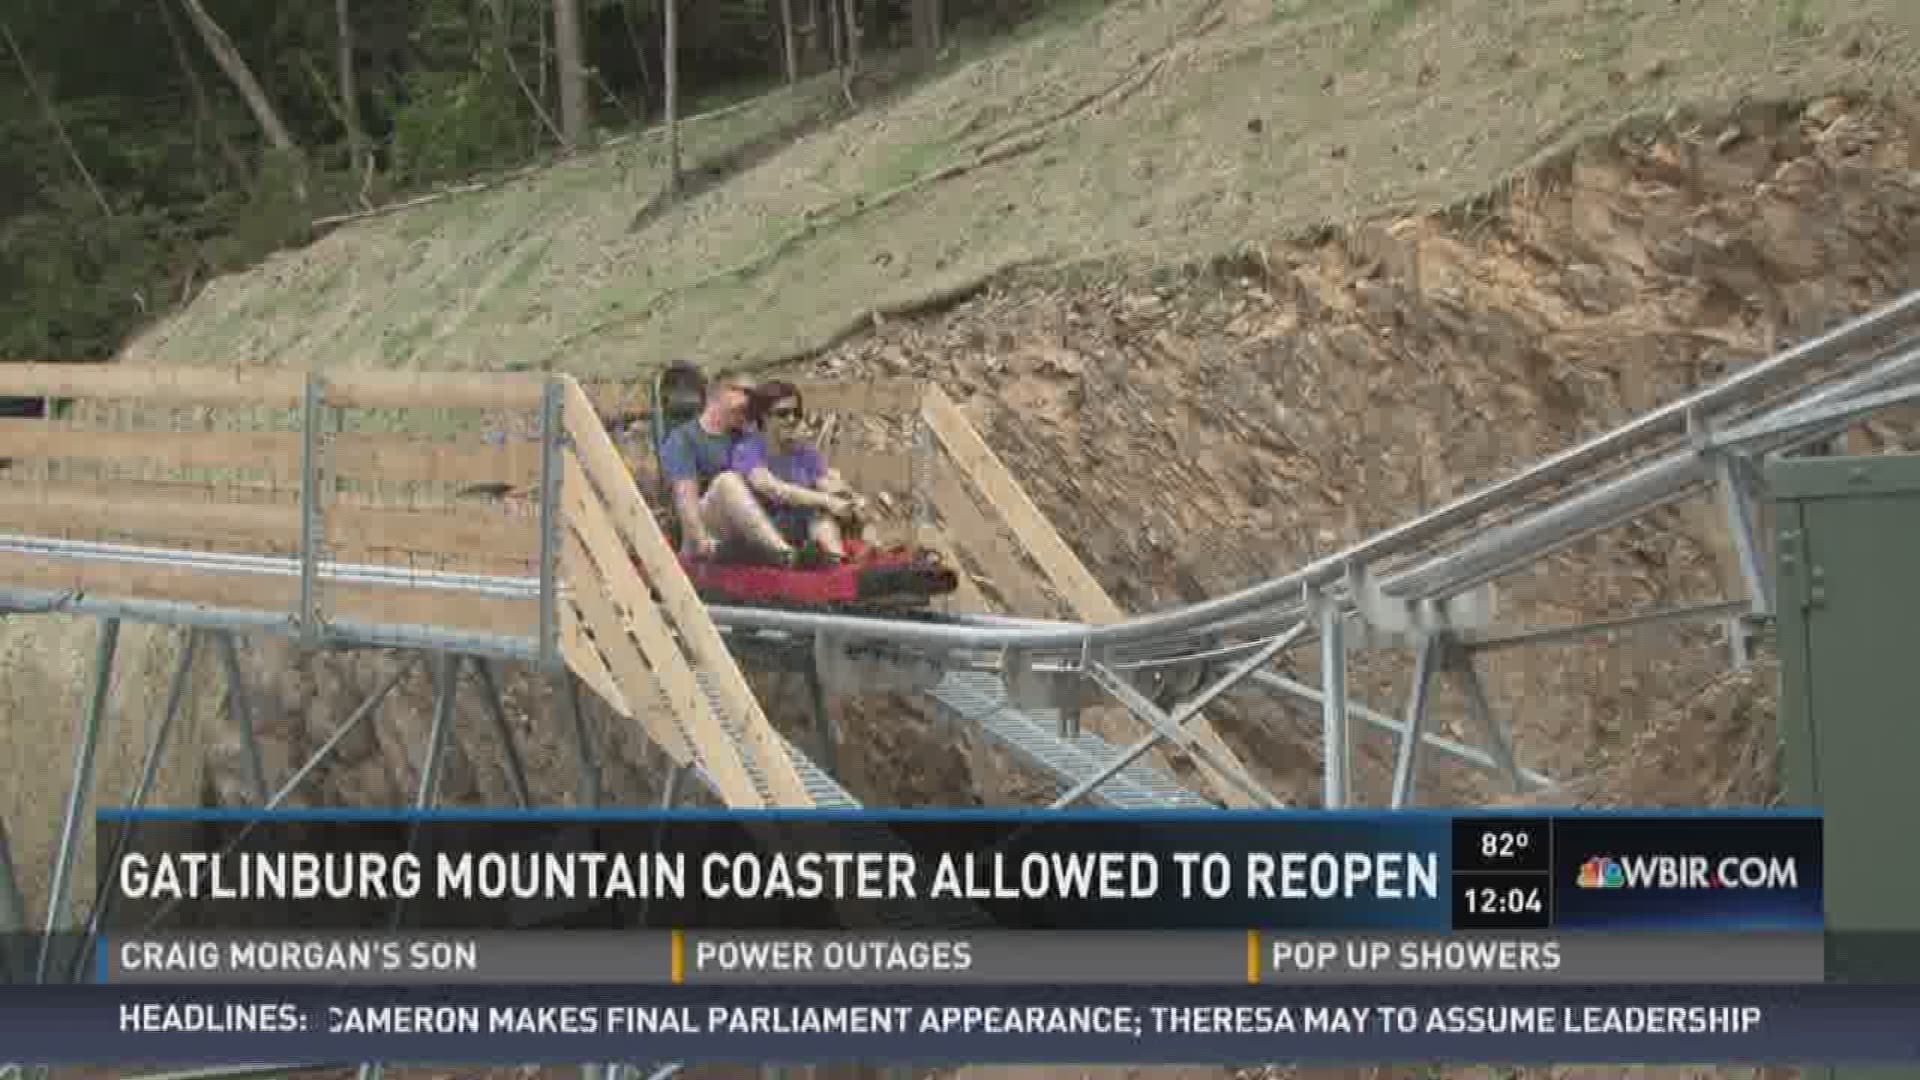 Ten days after a woman was thrown from a Gatlinburg amusement ride and seriously injured, the state will allow the business to reopen.